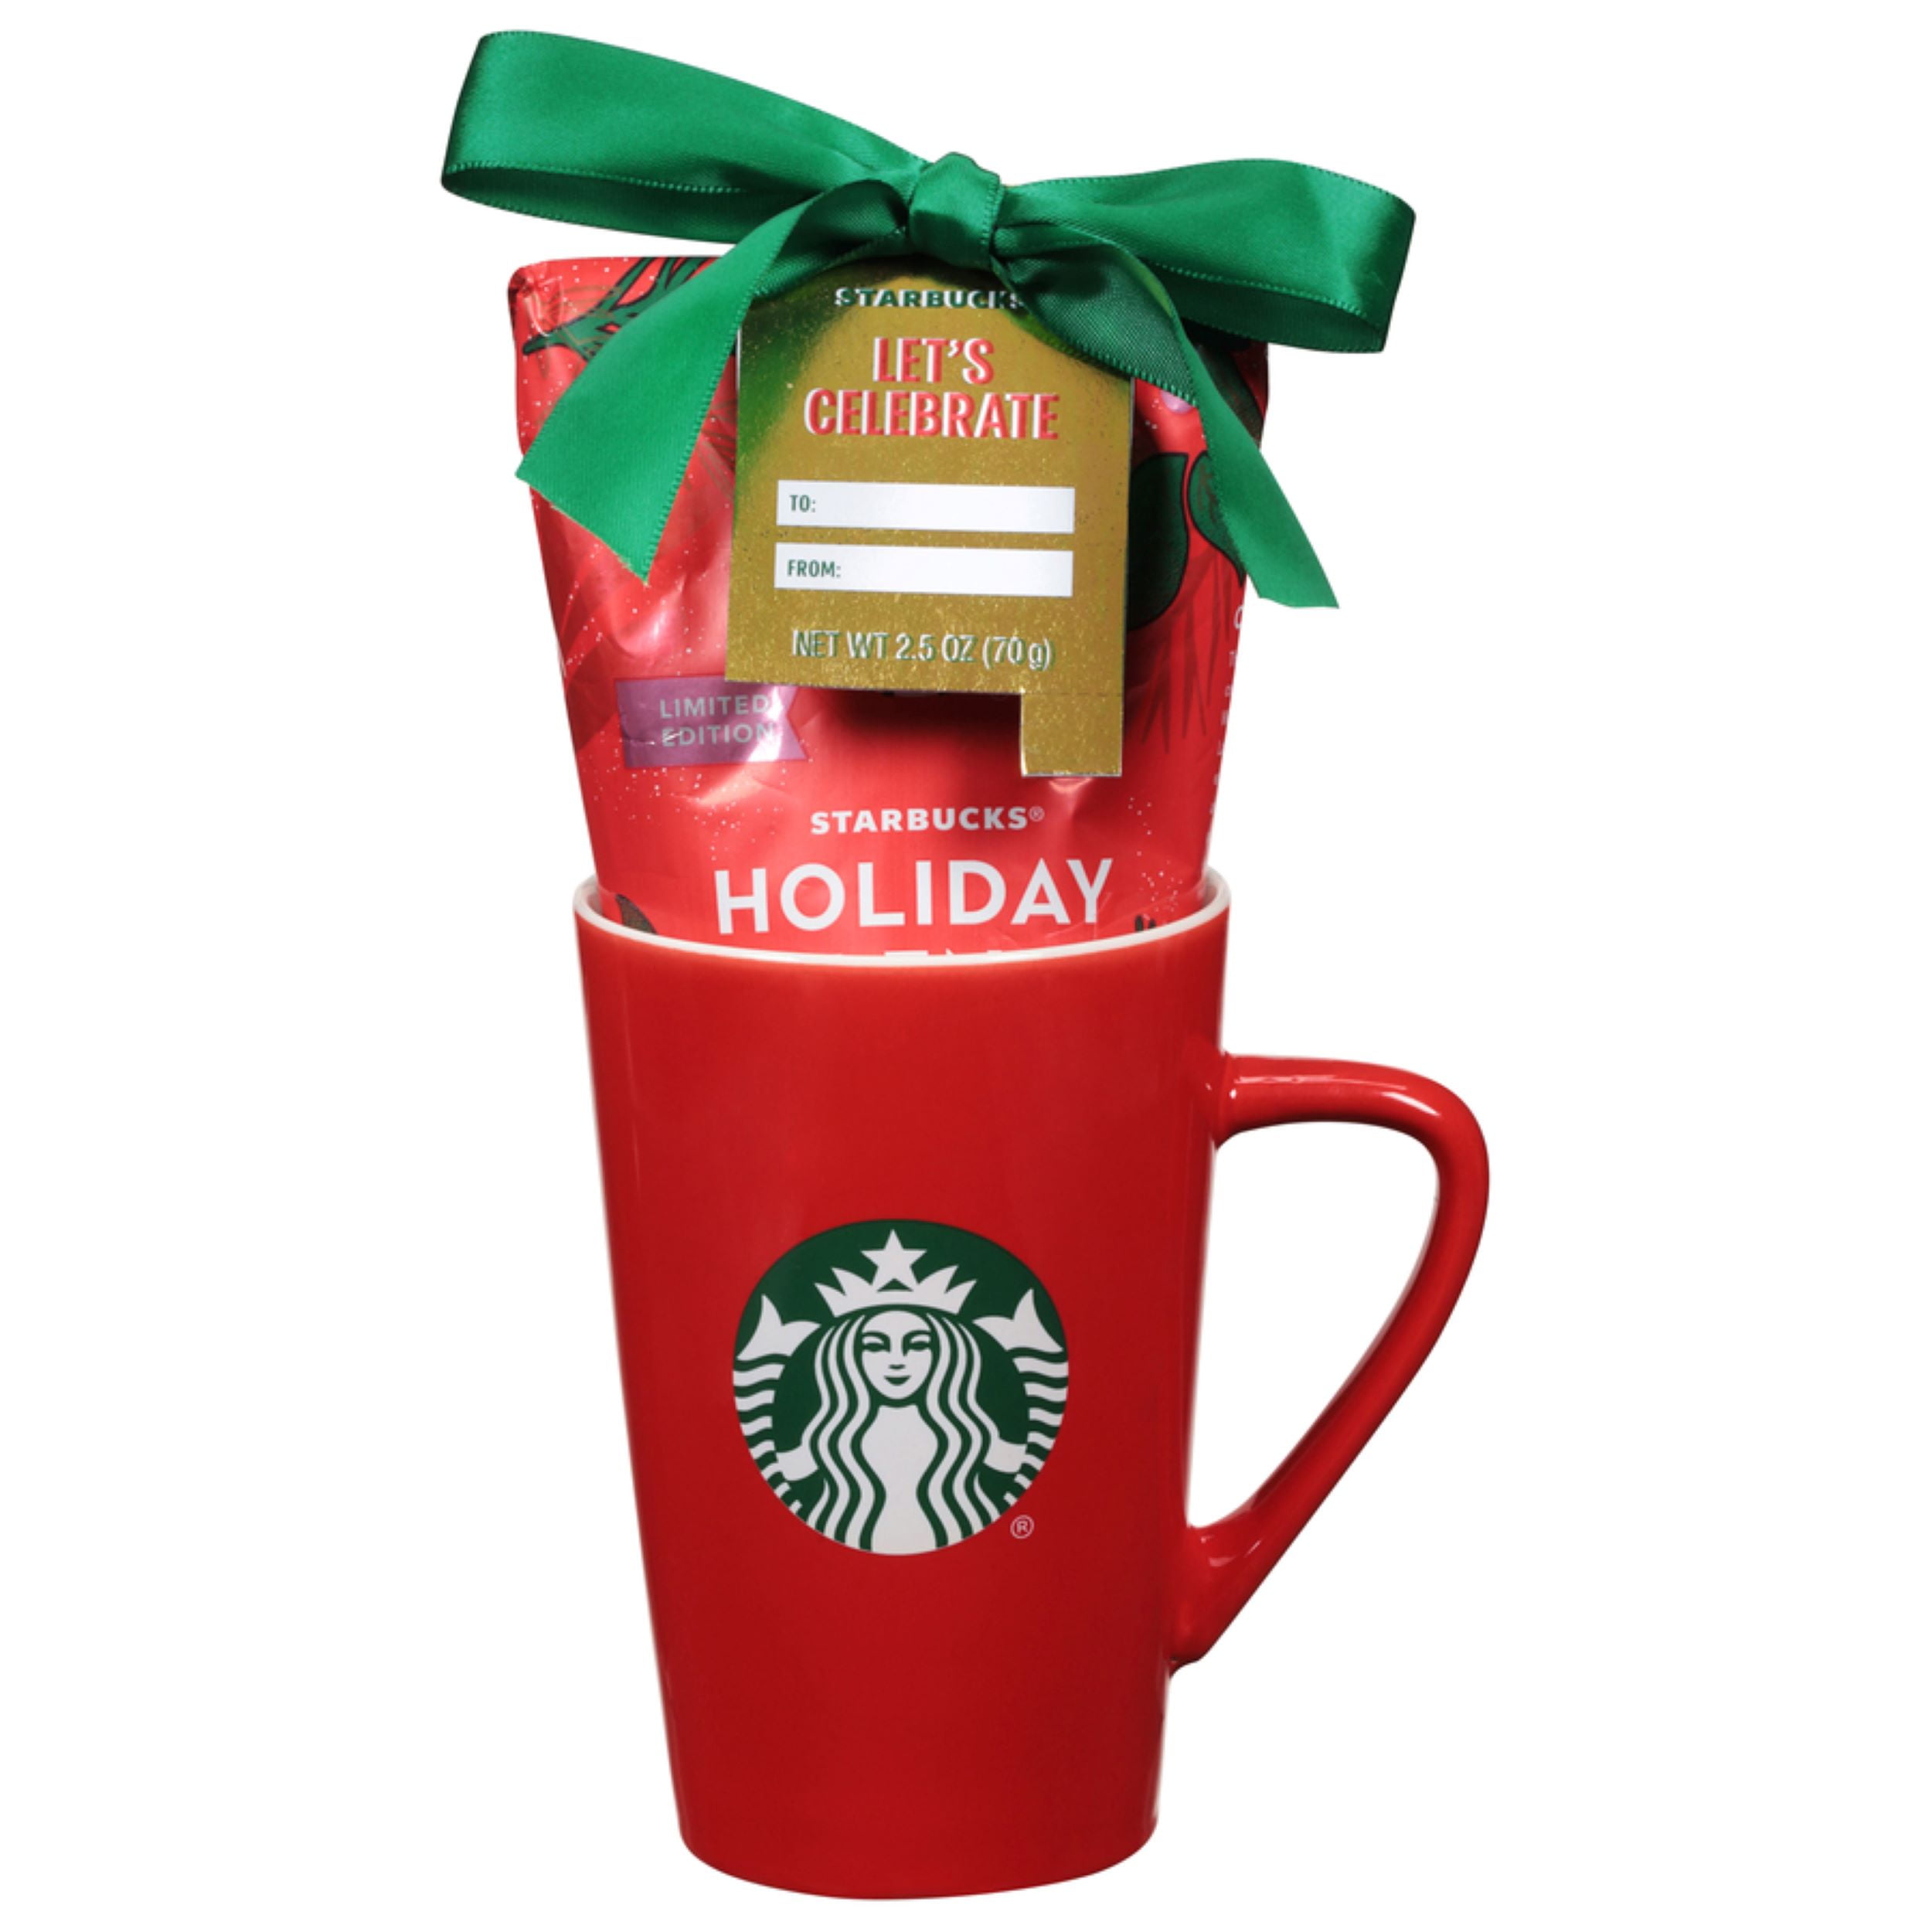 Starbucks Savor the Season Holiday Gift Pack with Ceramic mugs and Starbucks Holiday Blend Coffee